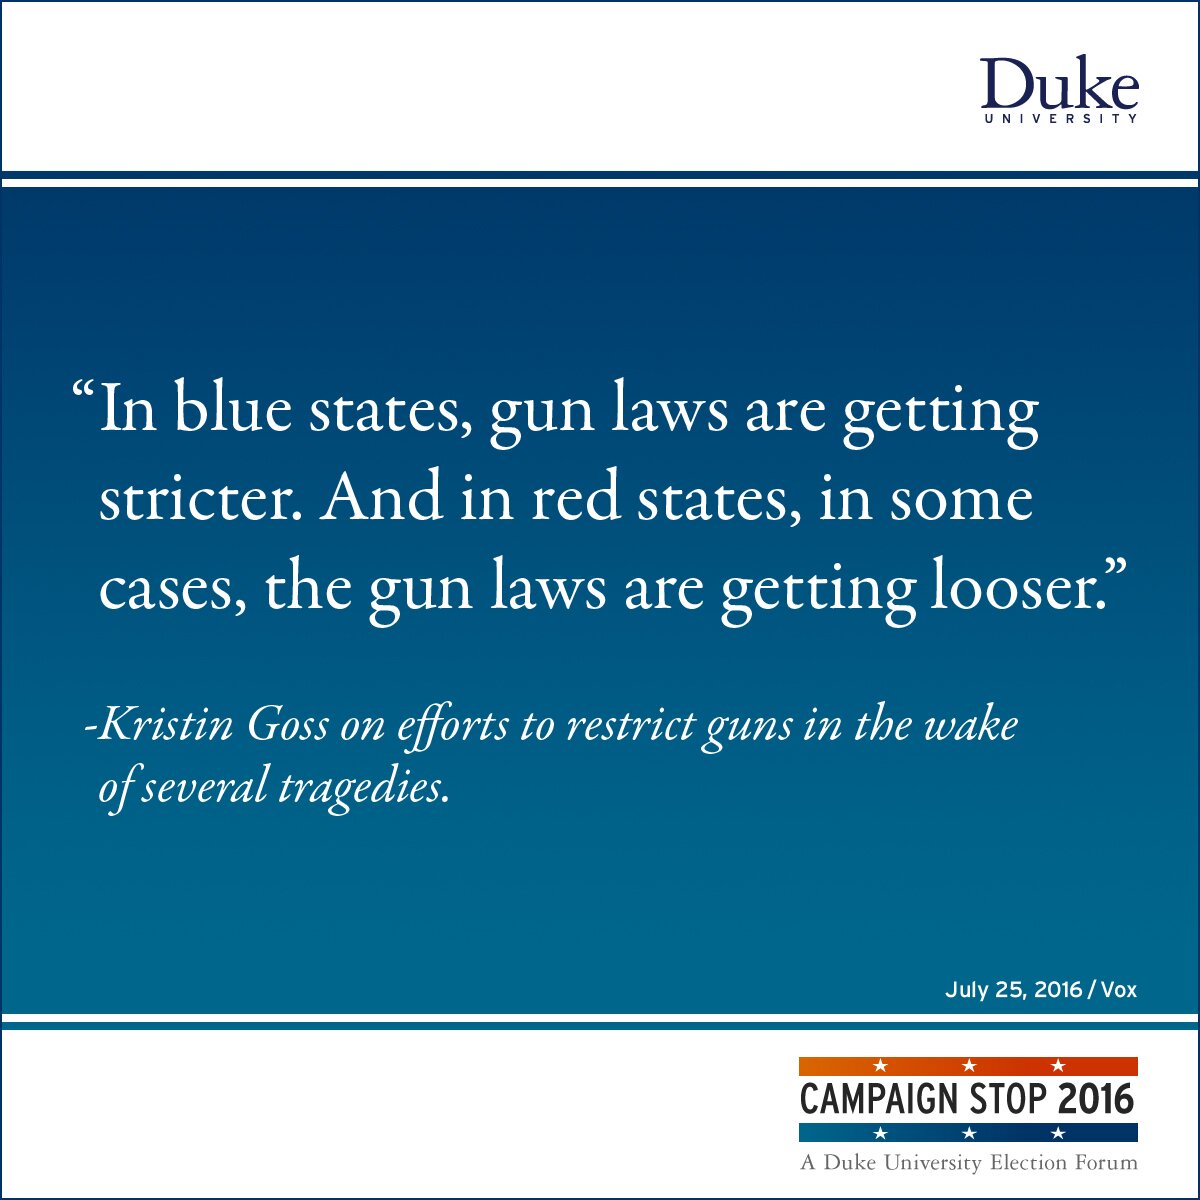 “In blue states, gun laws are getting stricter. And in red states, in some cases, the gun laws are getting looser.” -Kristin Goss on efforts to restrict guns in the wake of several tragedies.